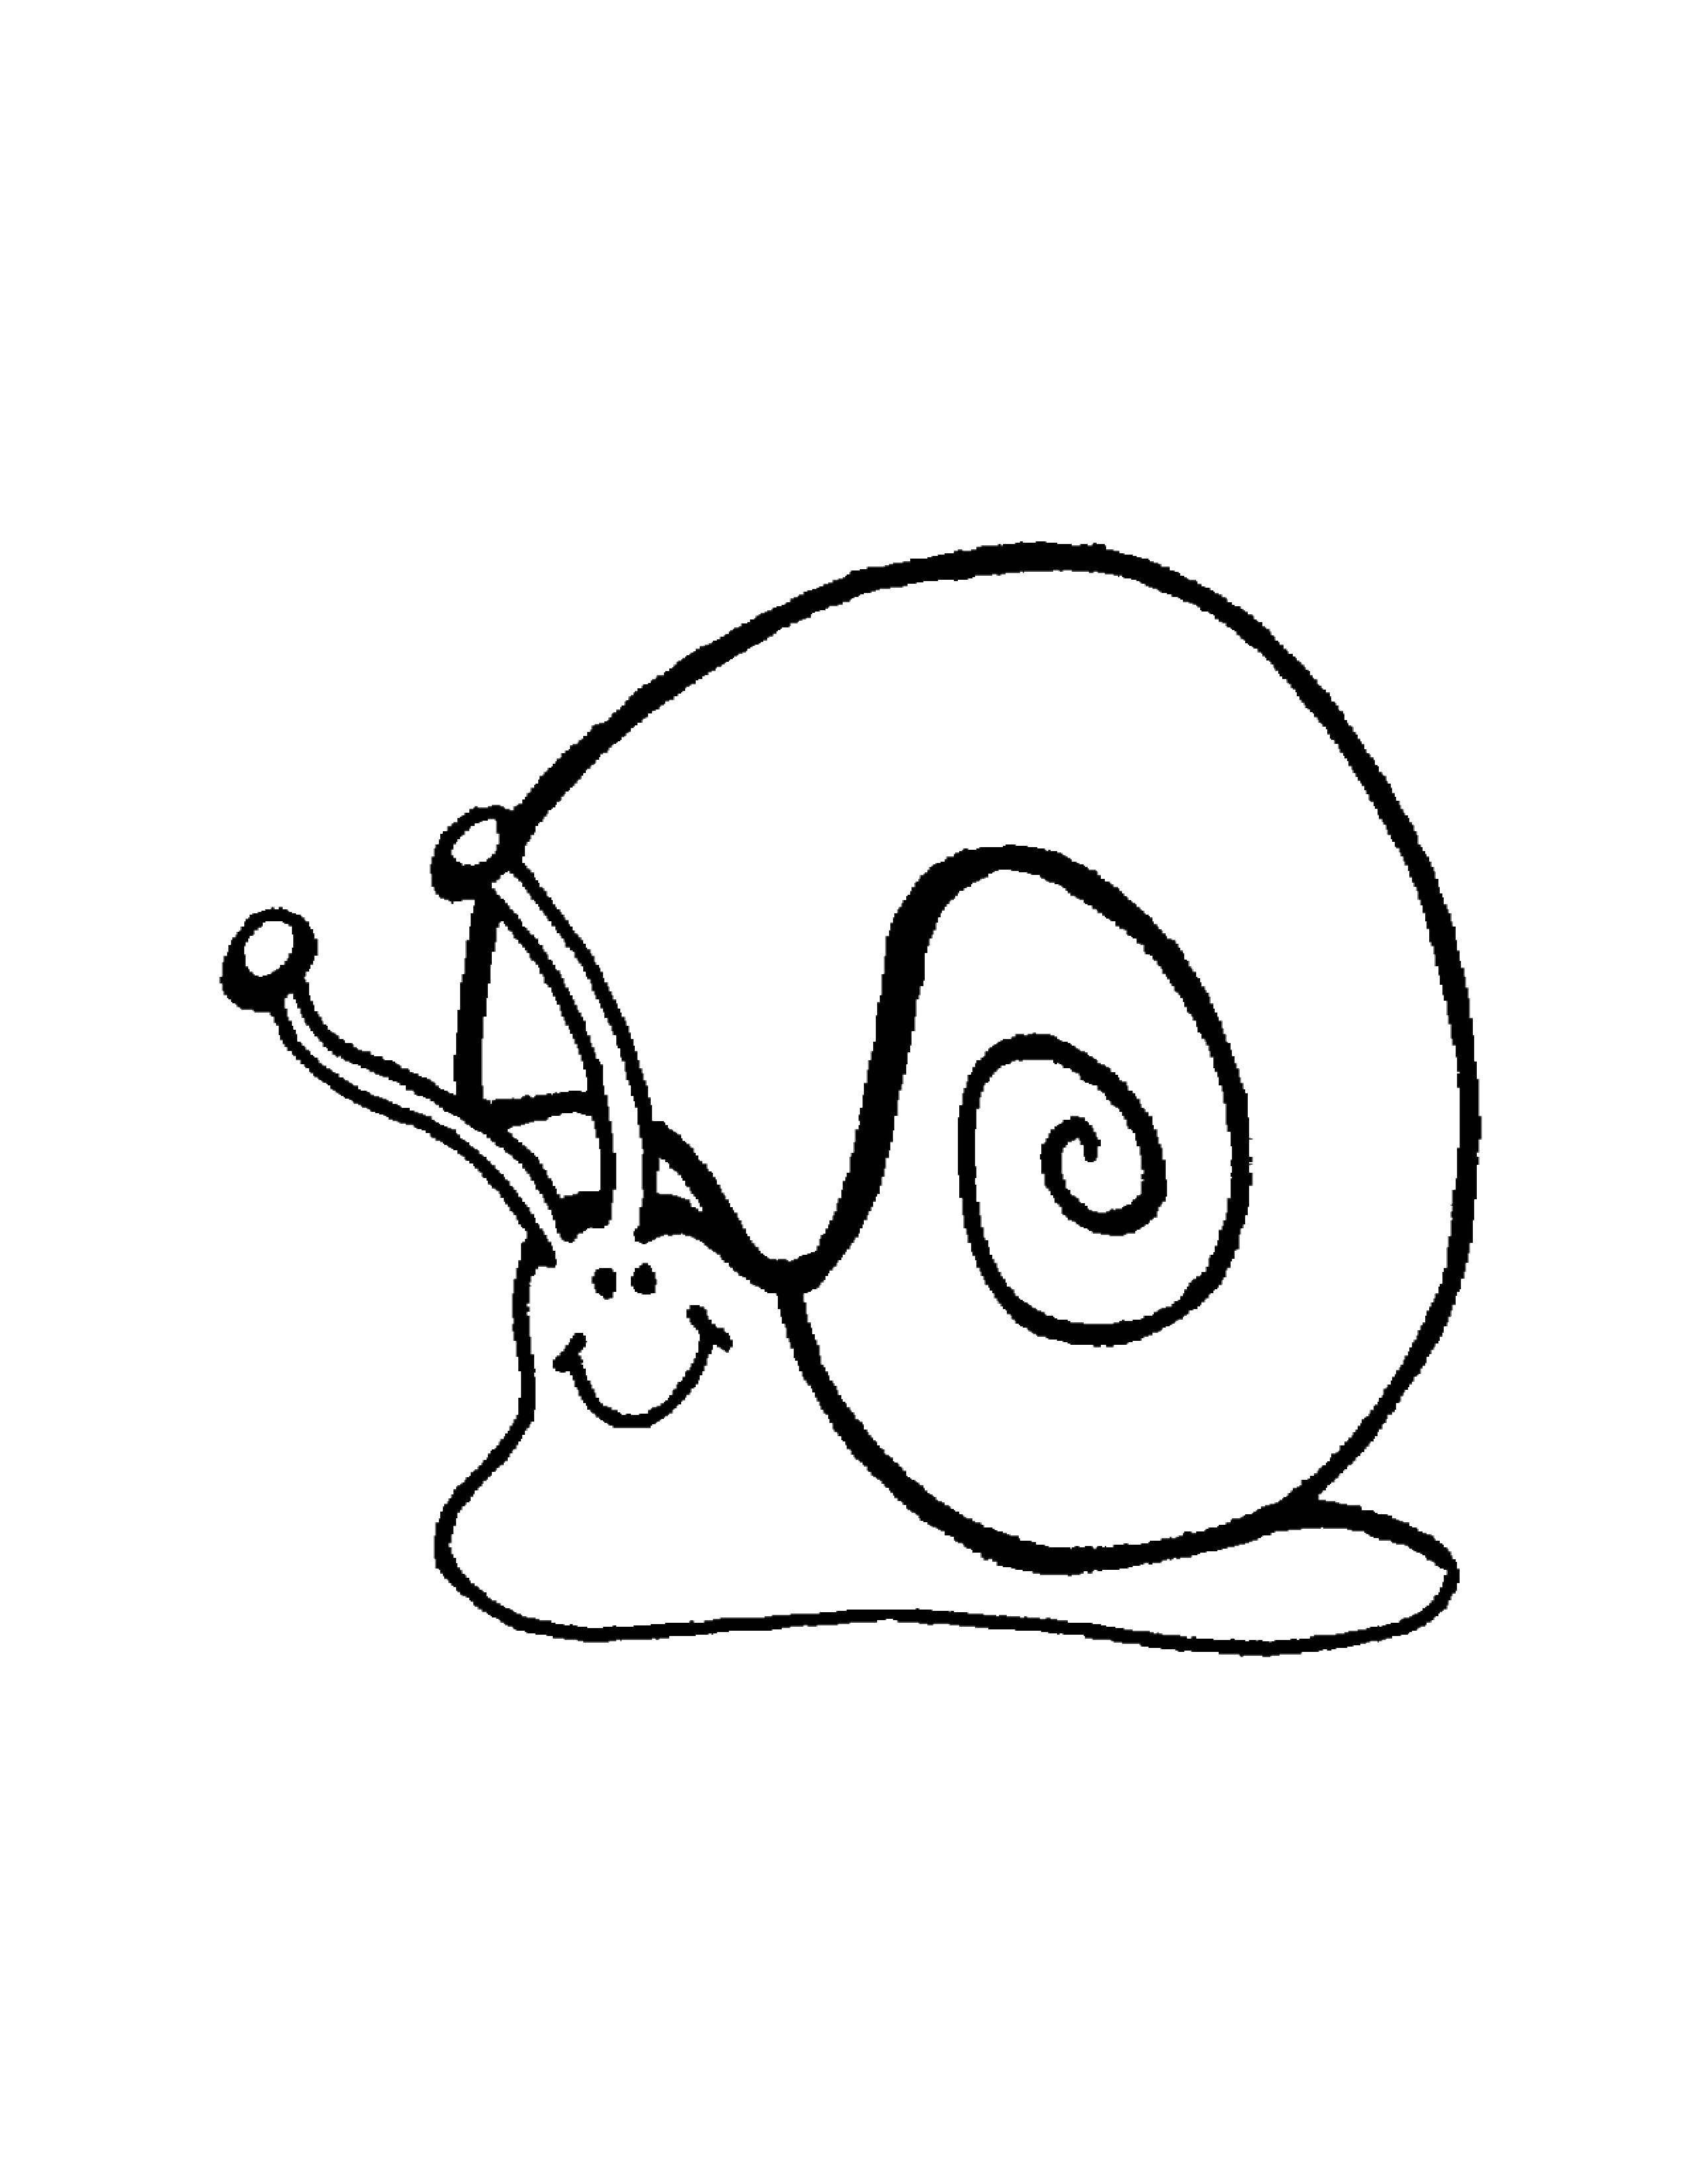 Coloring A large snail shell. Category Snails. Tags:  Snail.